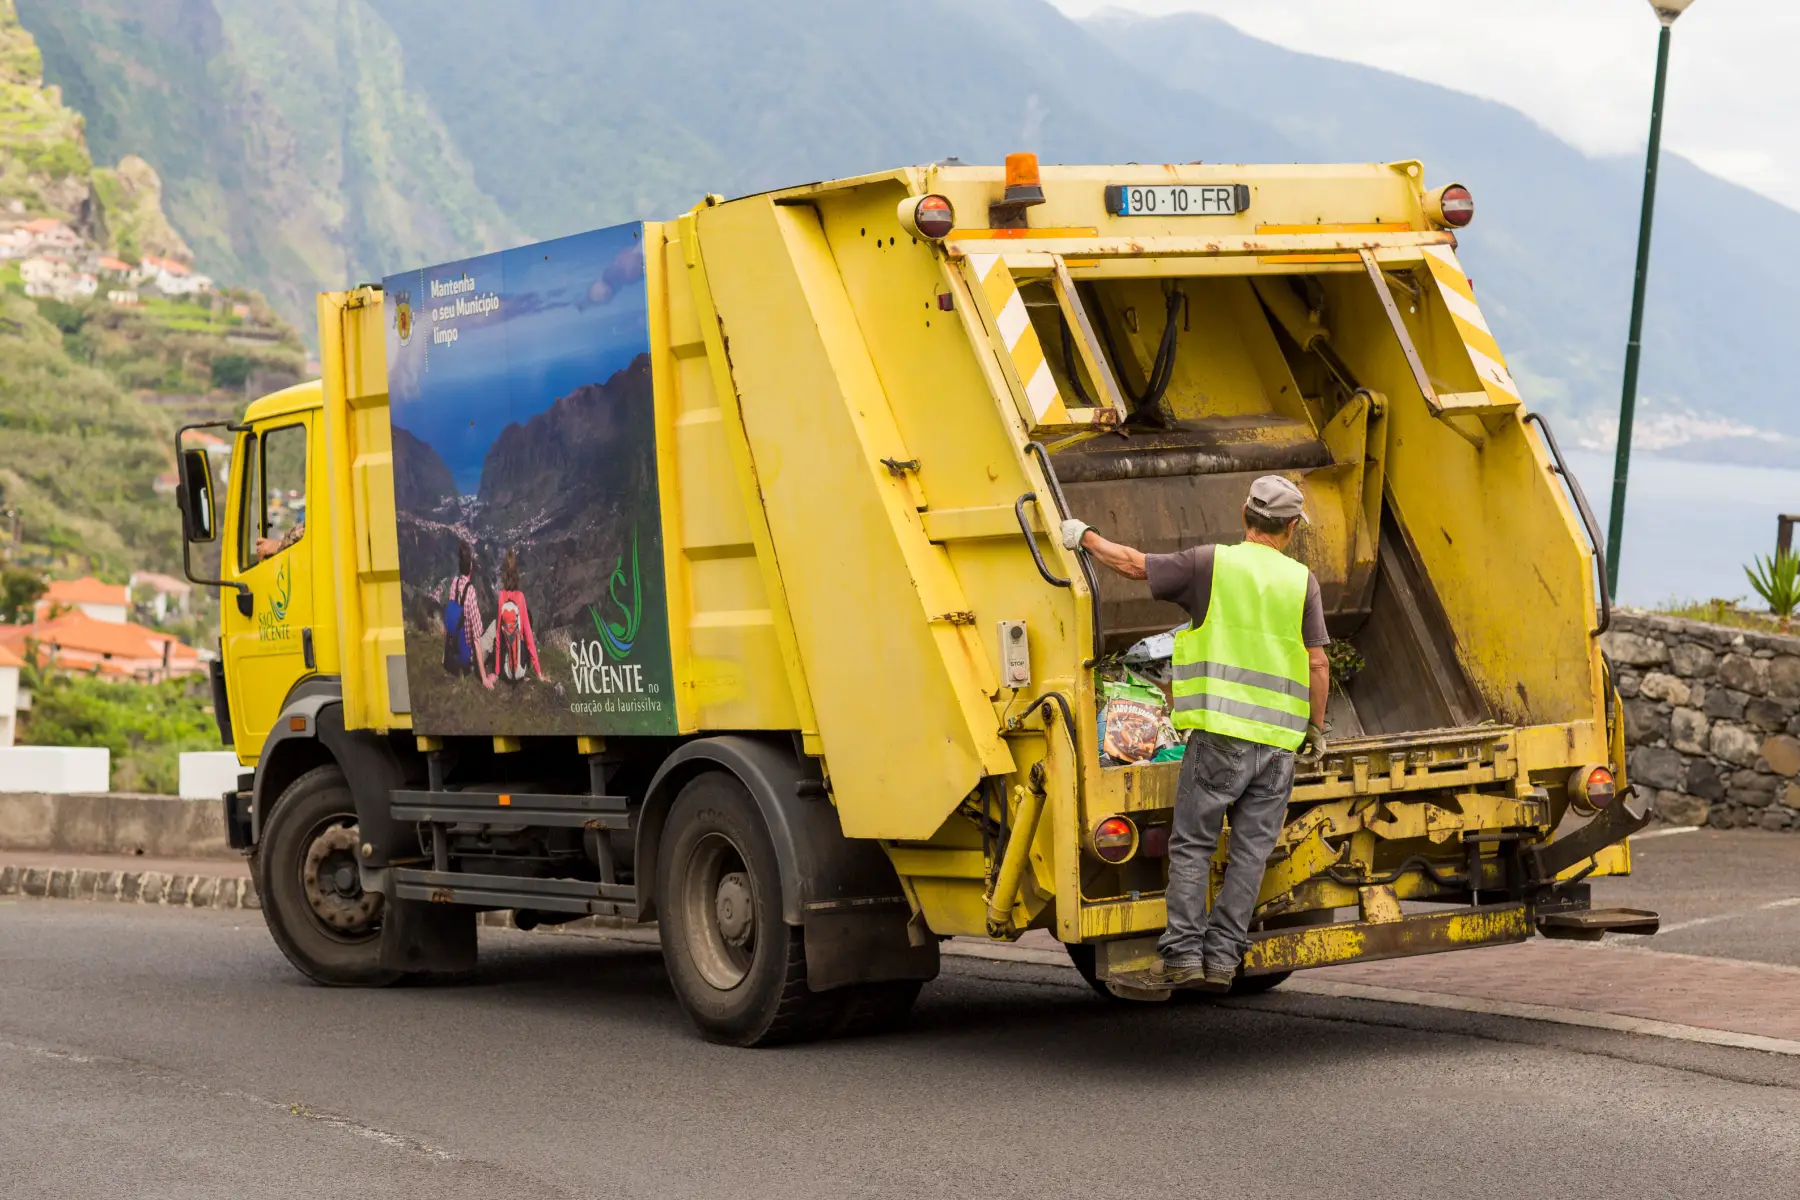 A yellow garbage truck driving through the hills of Portugal